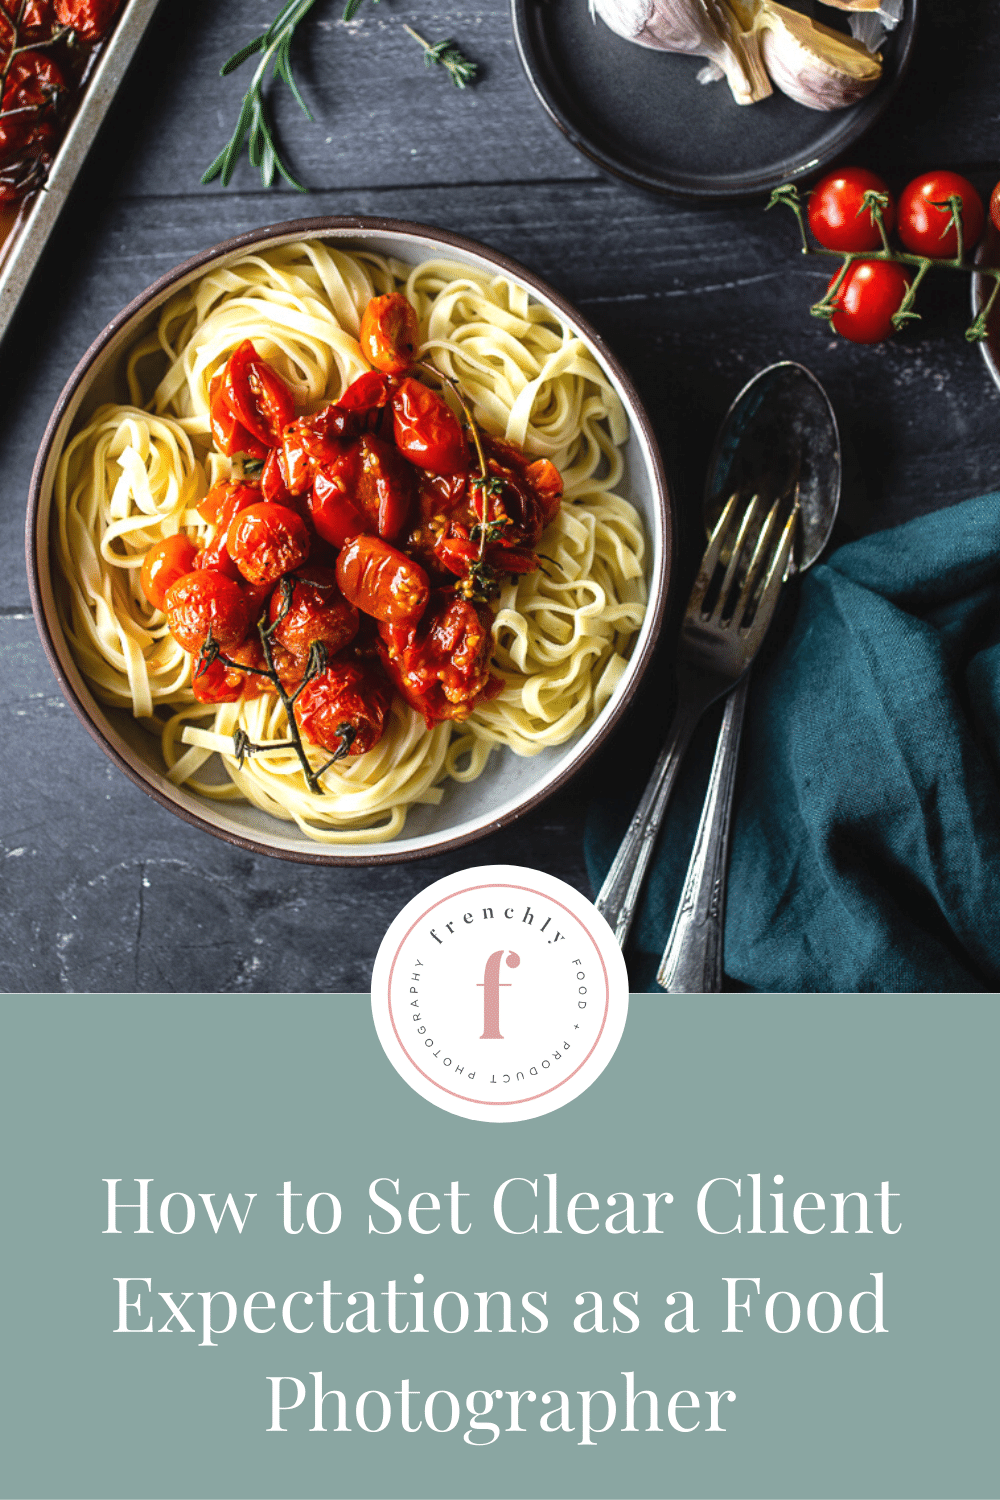 How to Set Clear Client Expectations as a Food Photographer | Frenchly Food + Product Photography